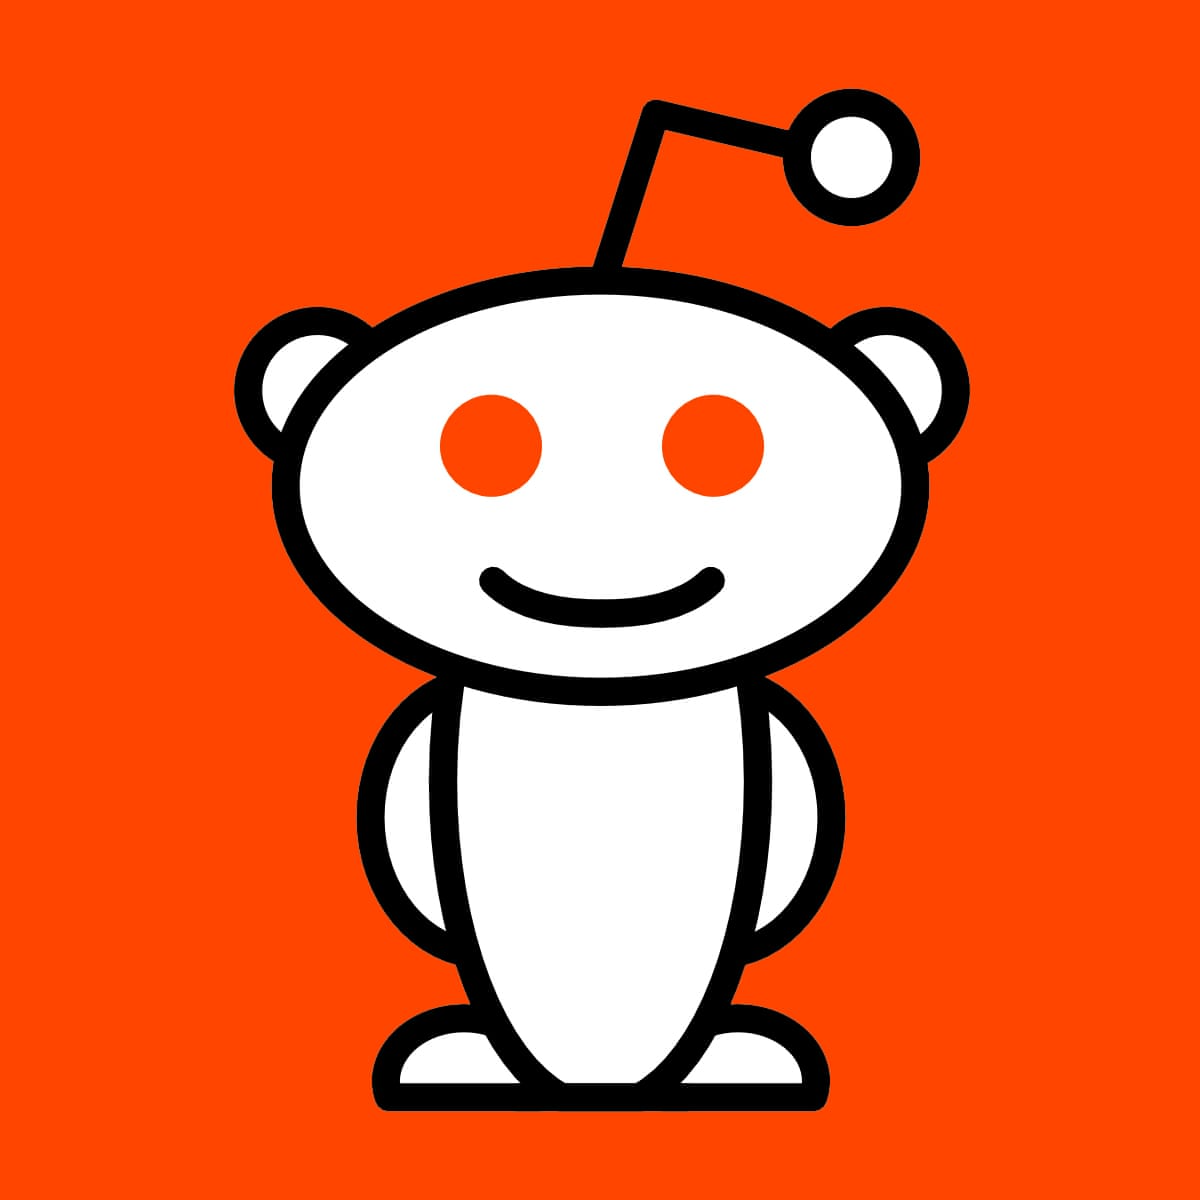 Reddit Comments Can Now Be Searched For